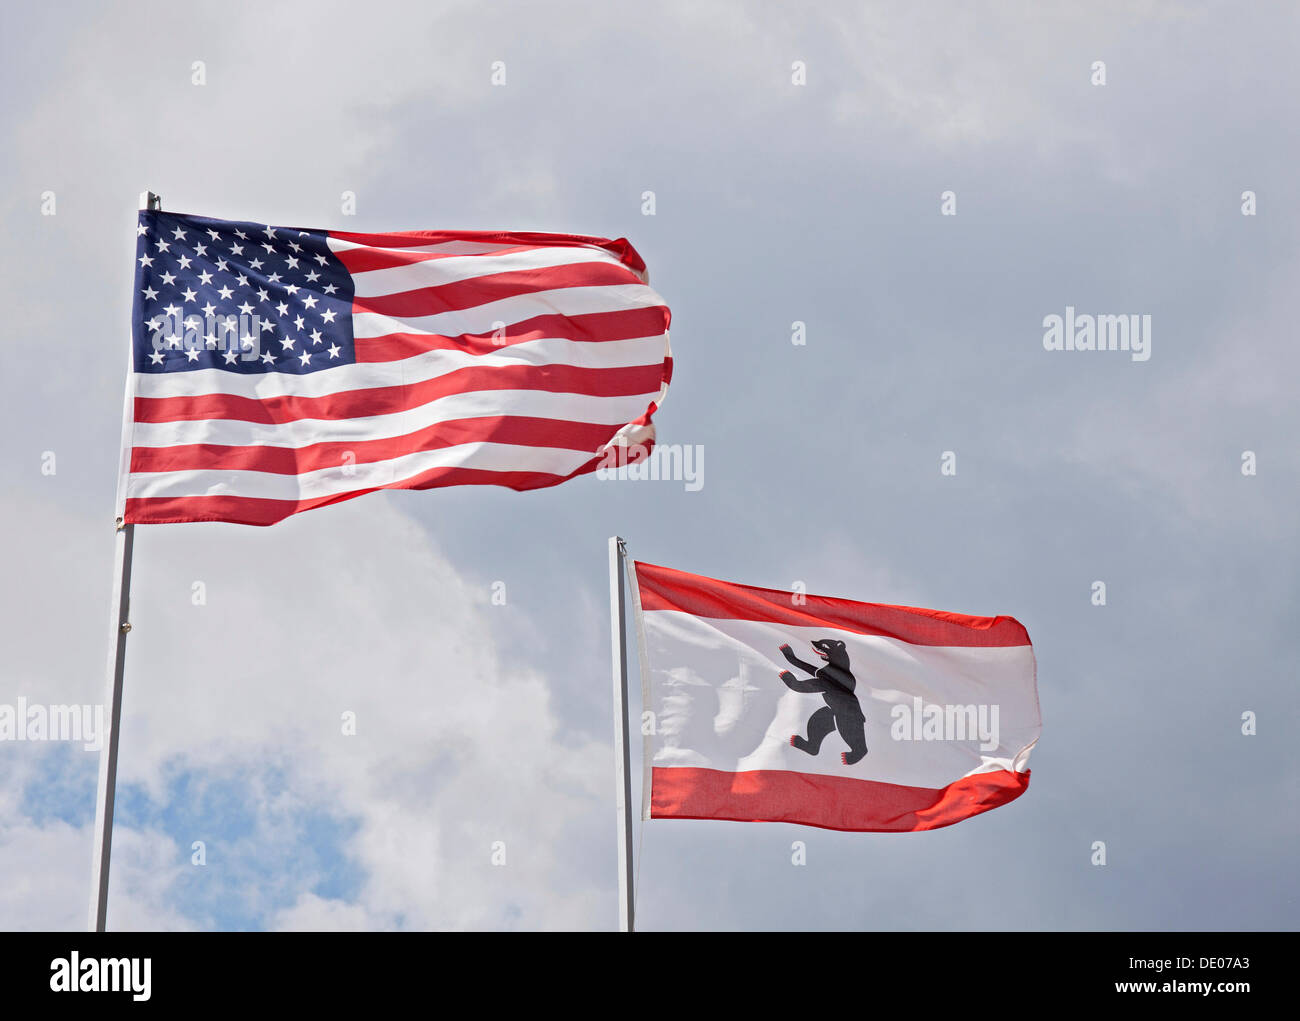 Flags of the USA and Berlin blowing in the wind, stormy Stock Photo